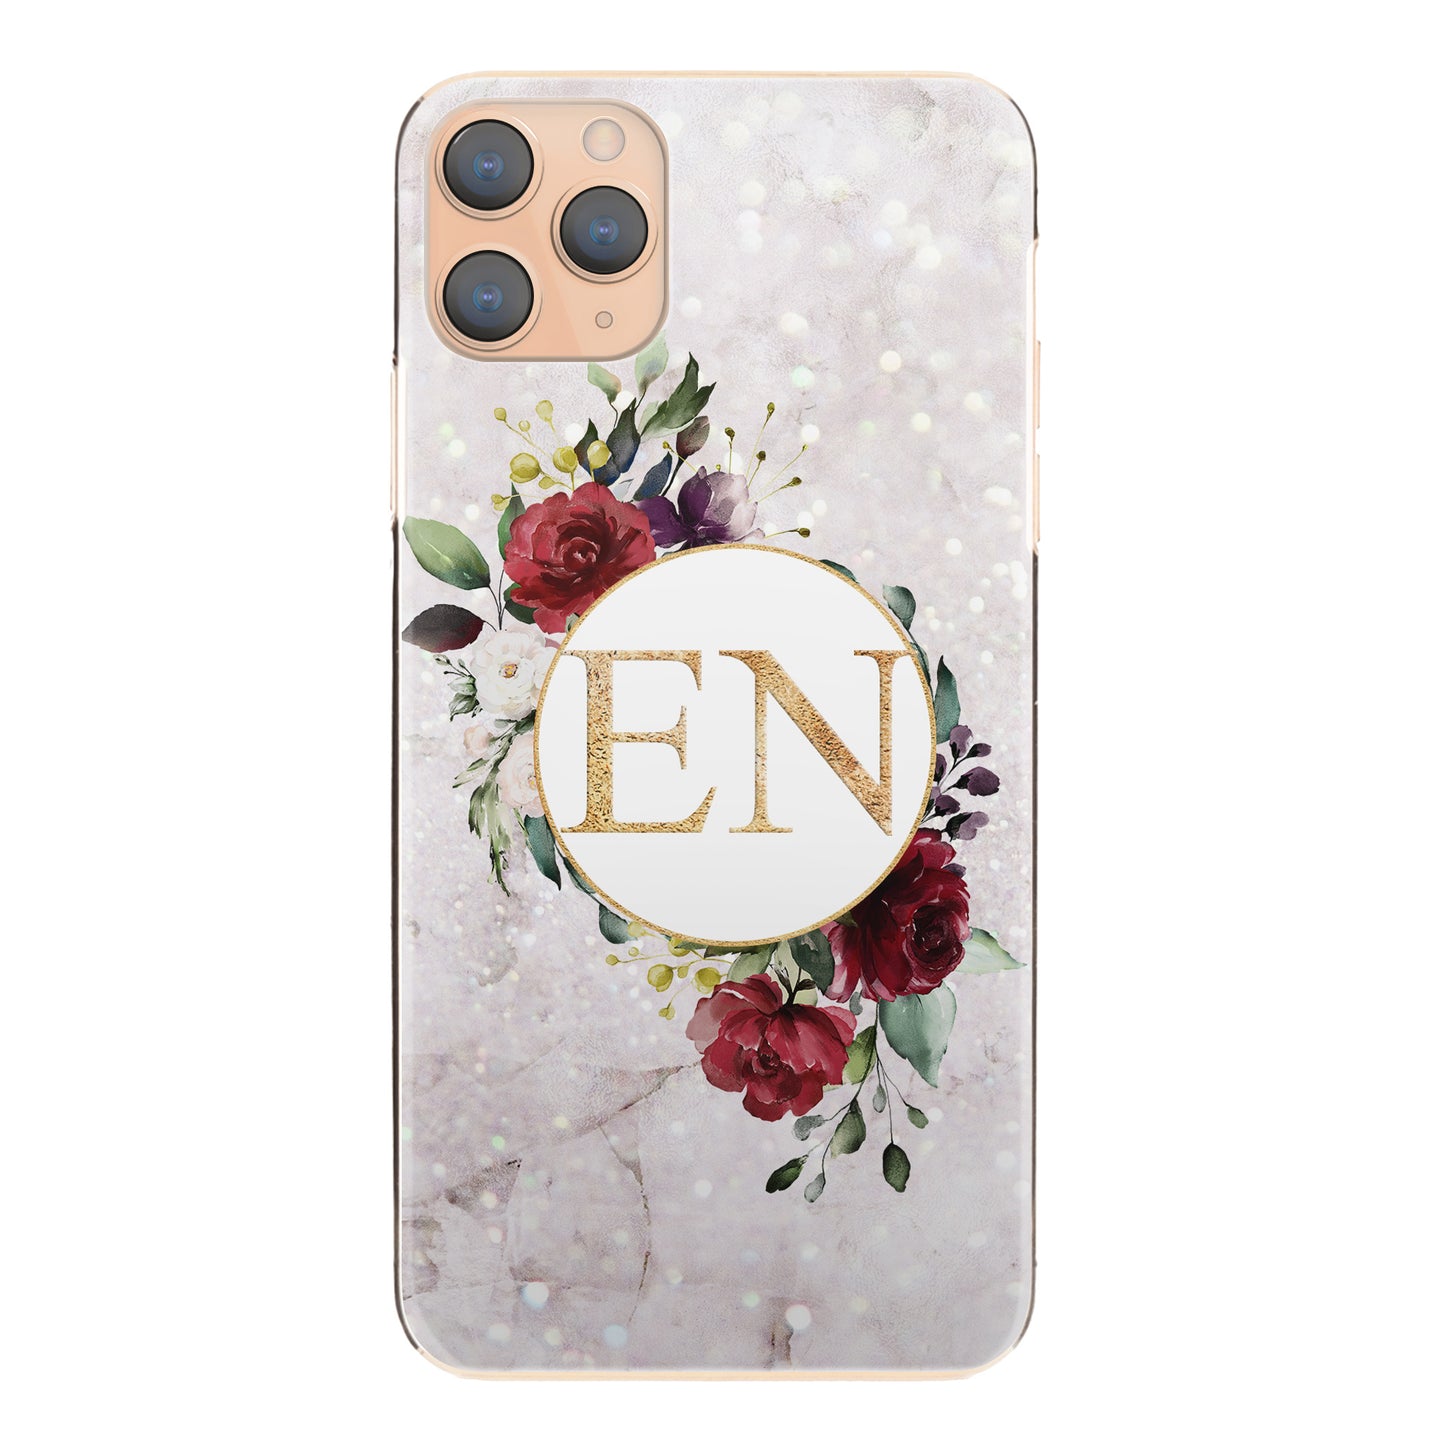 Personalised Apple iPhone Hard Case with Floral Gold Initials on Crystal Marble